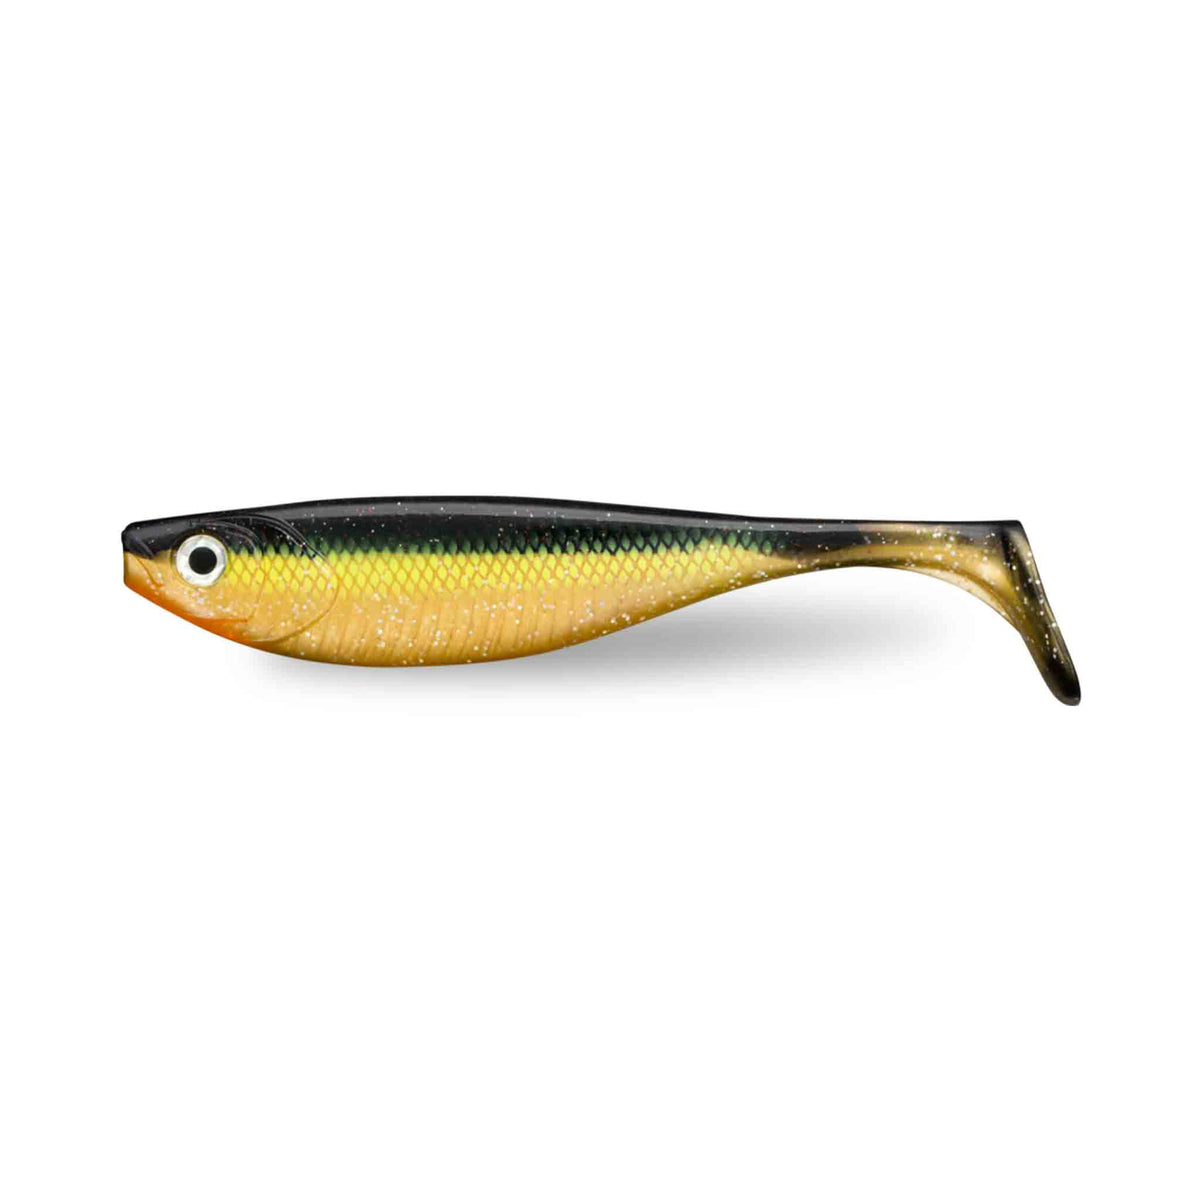 View of Swimbaits Storm Boom Shad 9" Swimbait Gold available at EZOKO Pike and Musky Shop